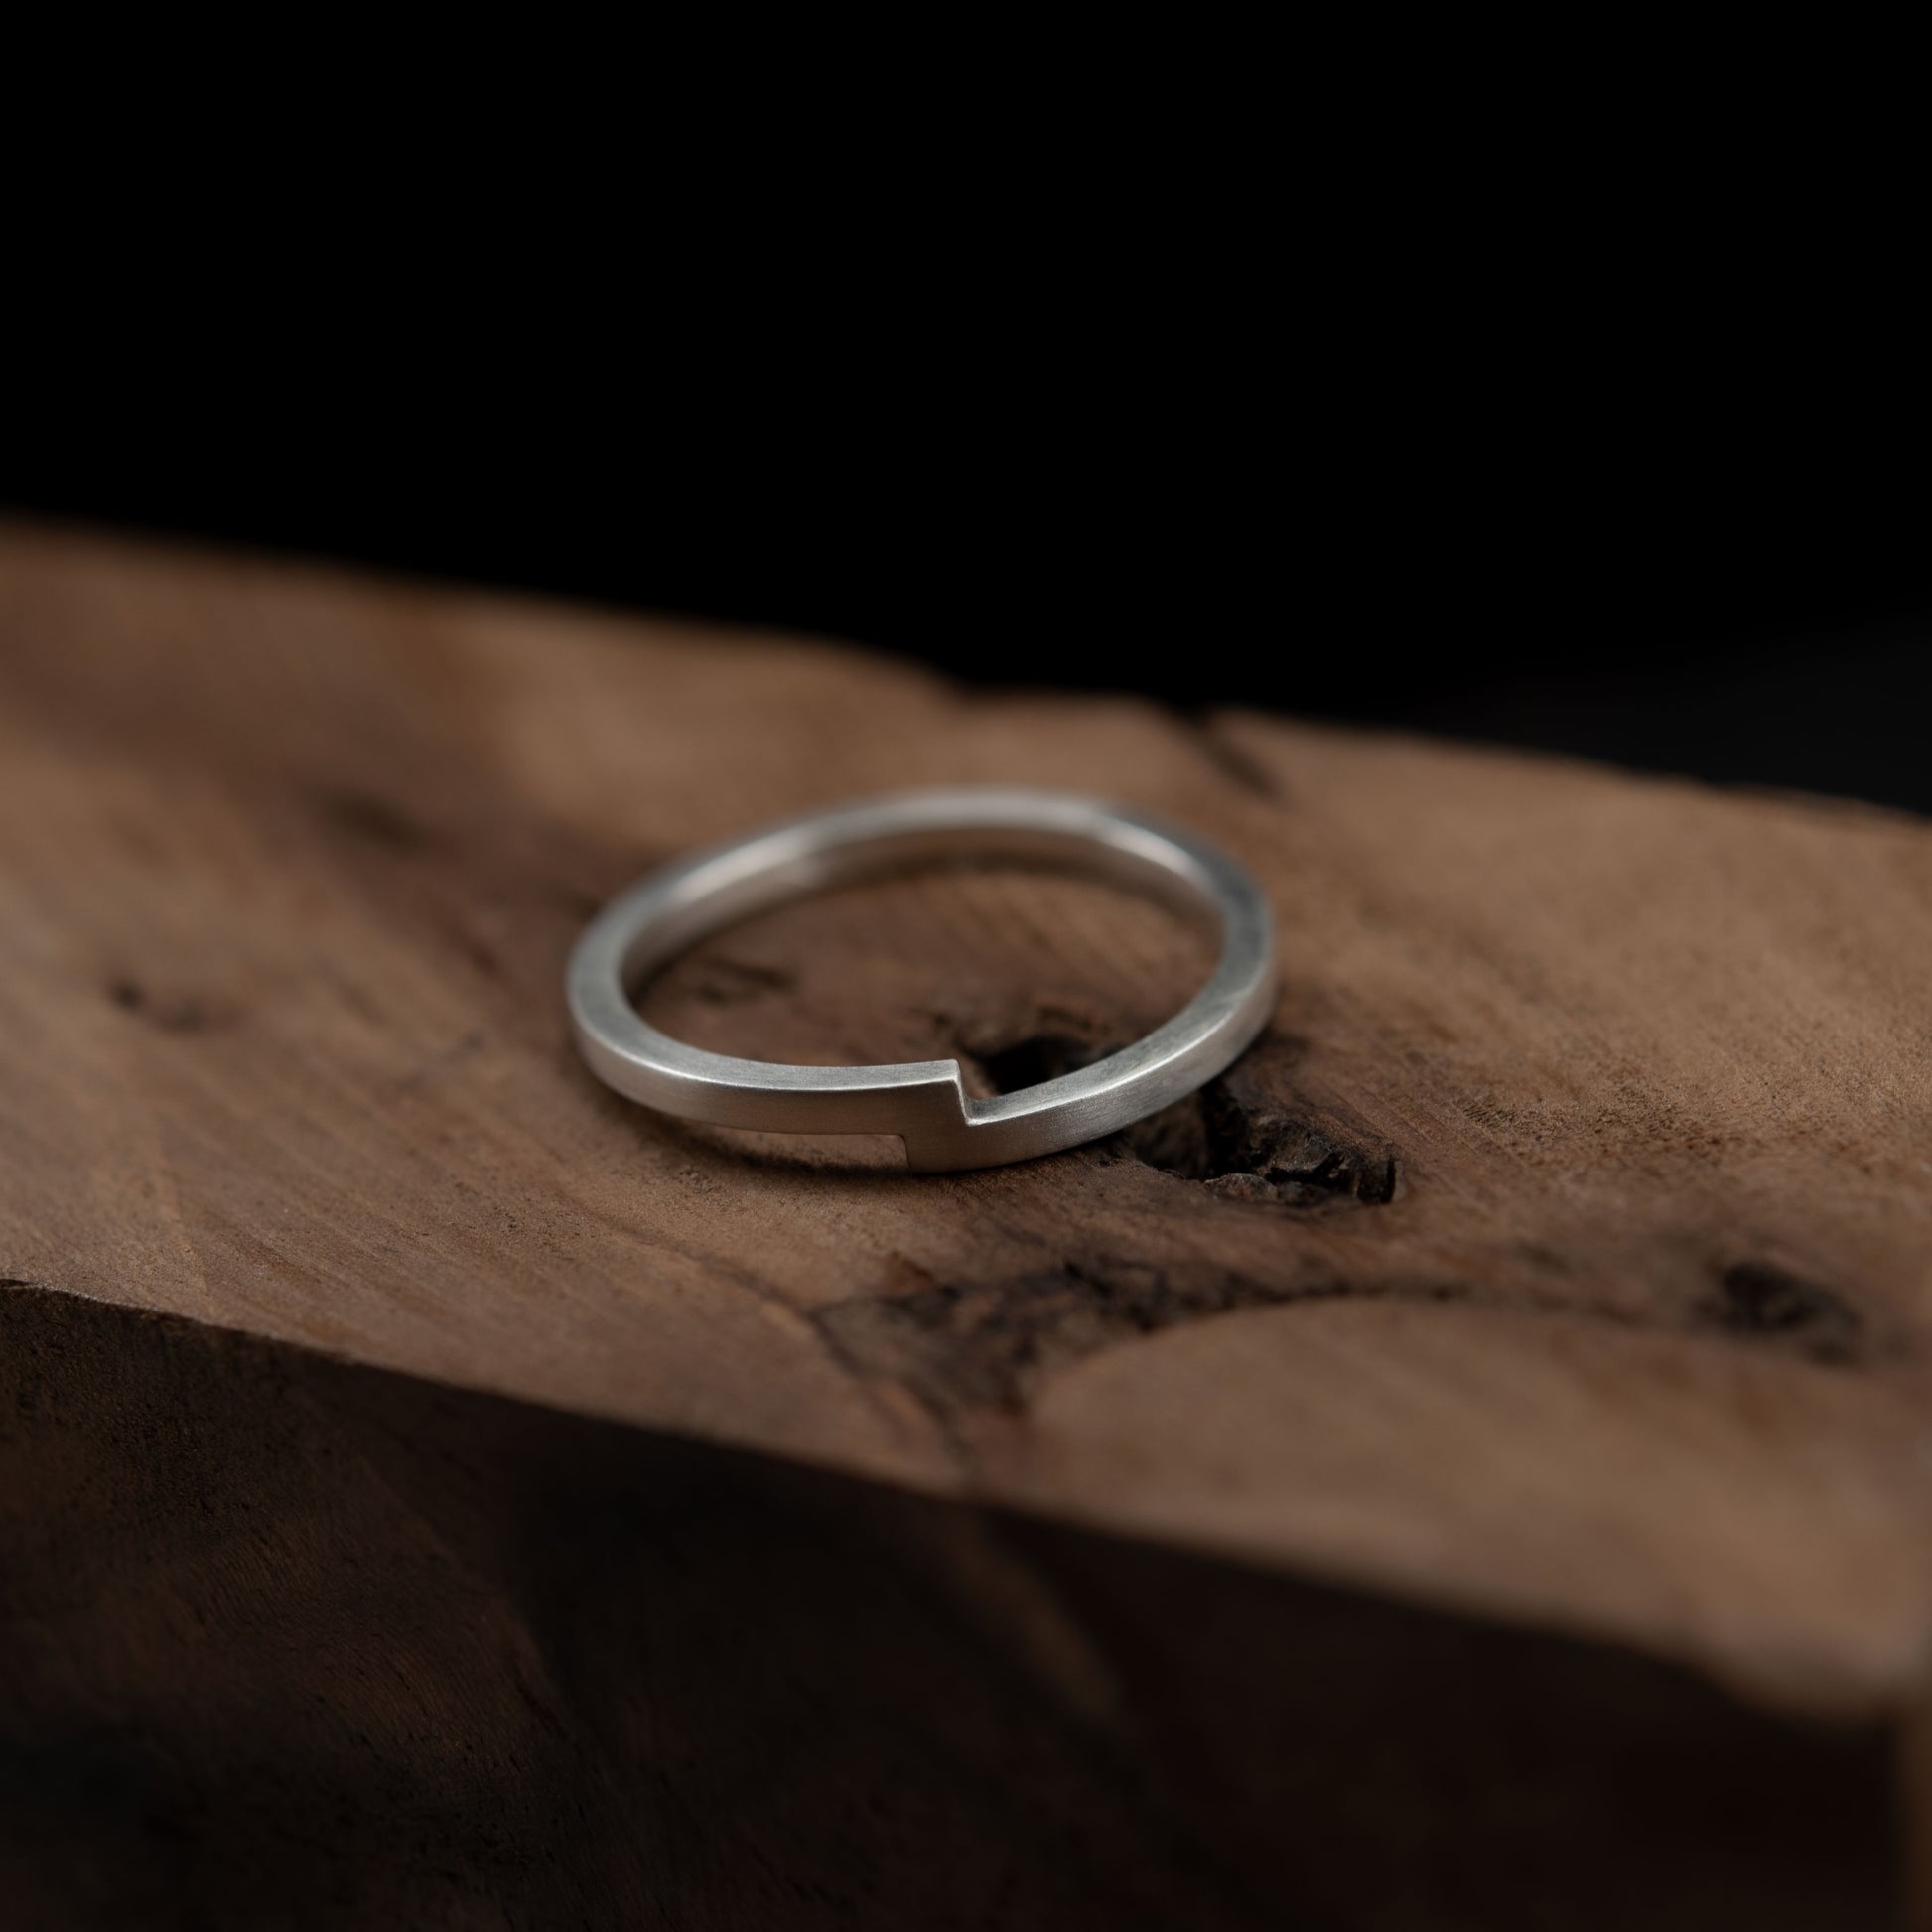 Square band silver ring. Made by hand in Paris, a classic design with a twist that made this thin band ring simple and yet modern!